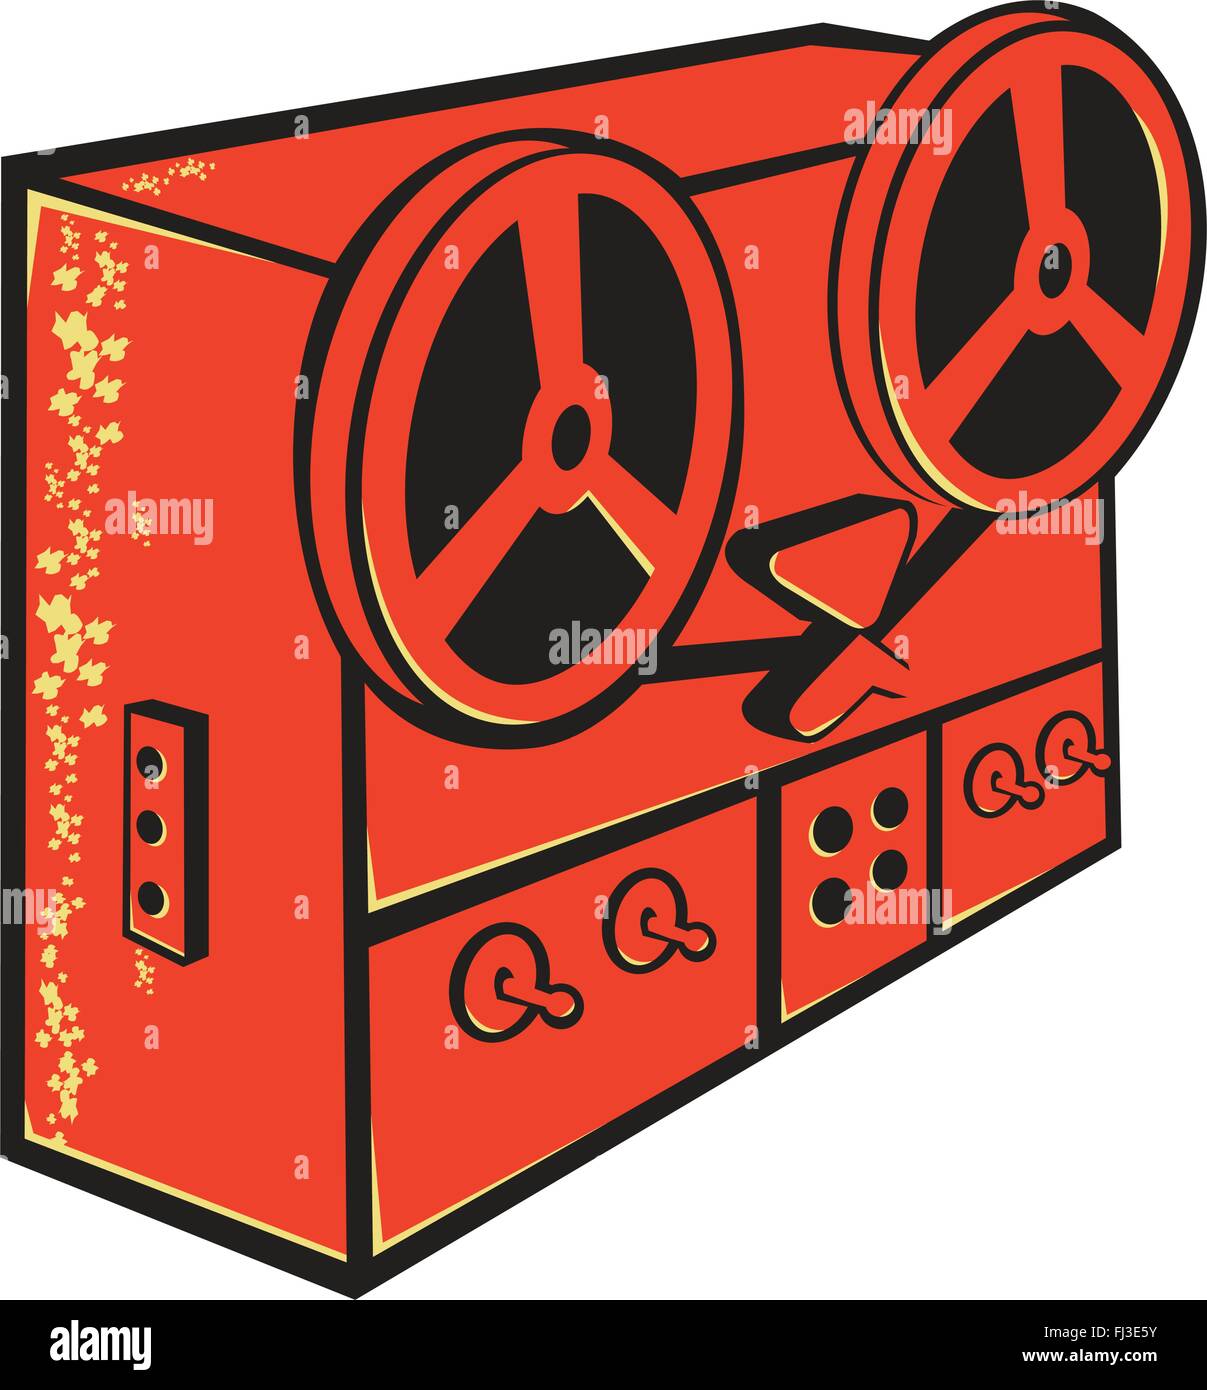 vector illustration of a tape recorder, tape deck, reel-to-reel